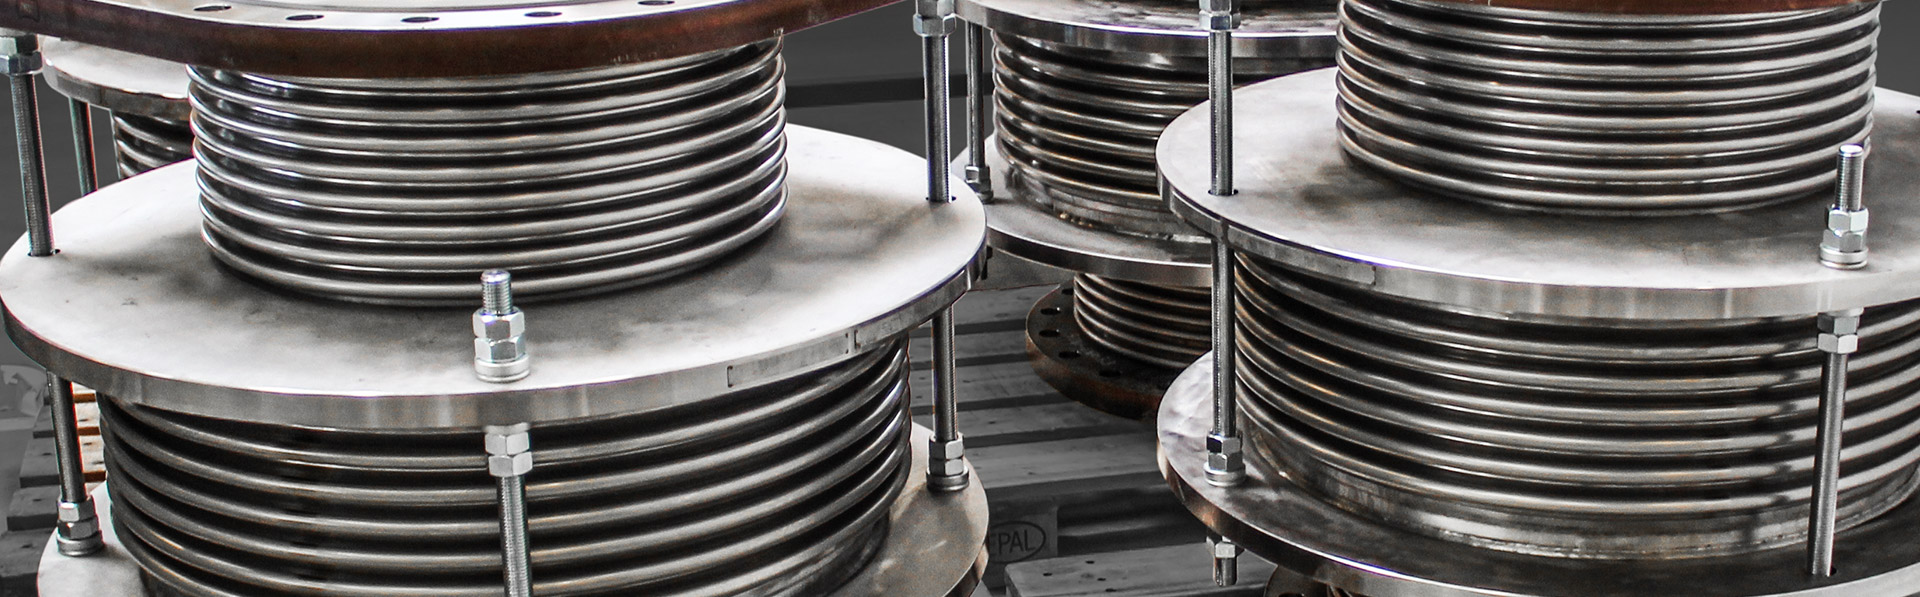 Pressure Balanced Expansion Joints made entirely from stainless steel